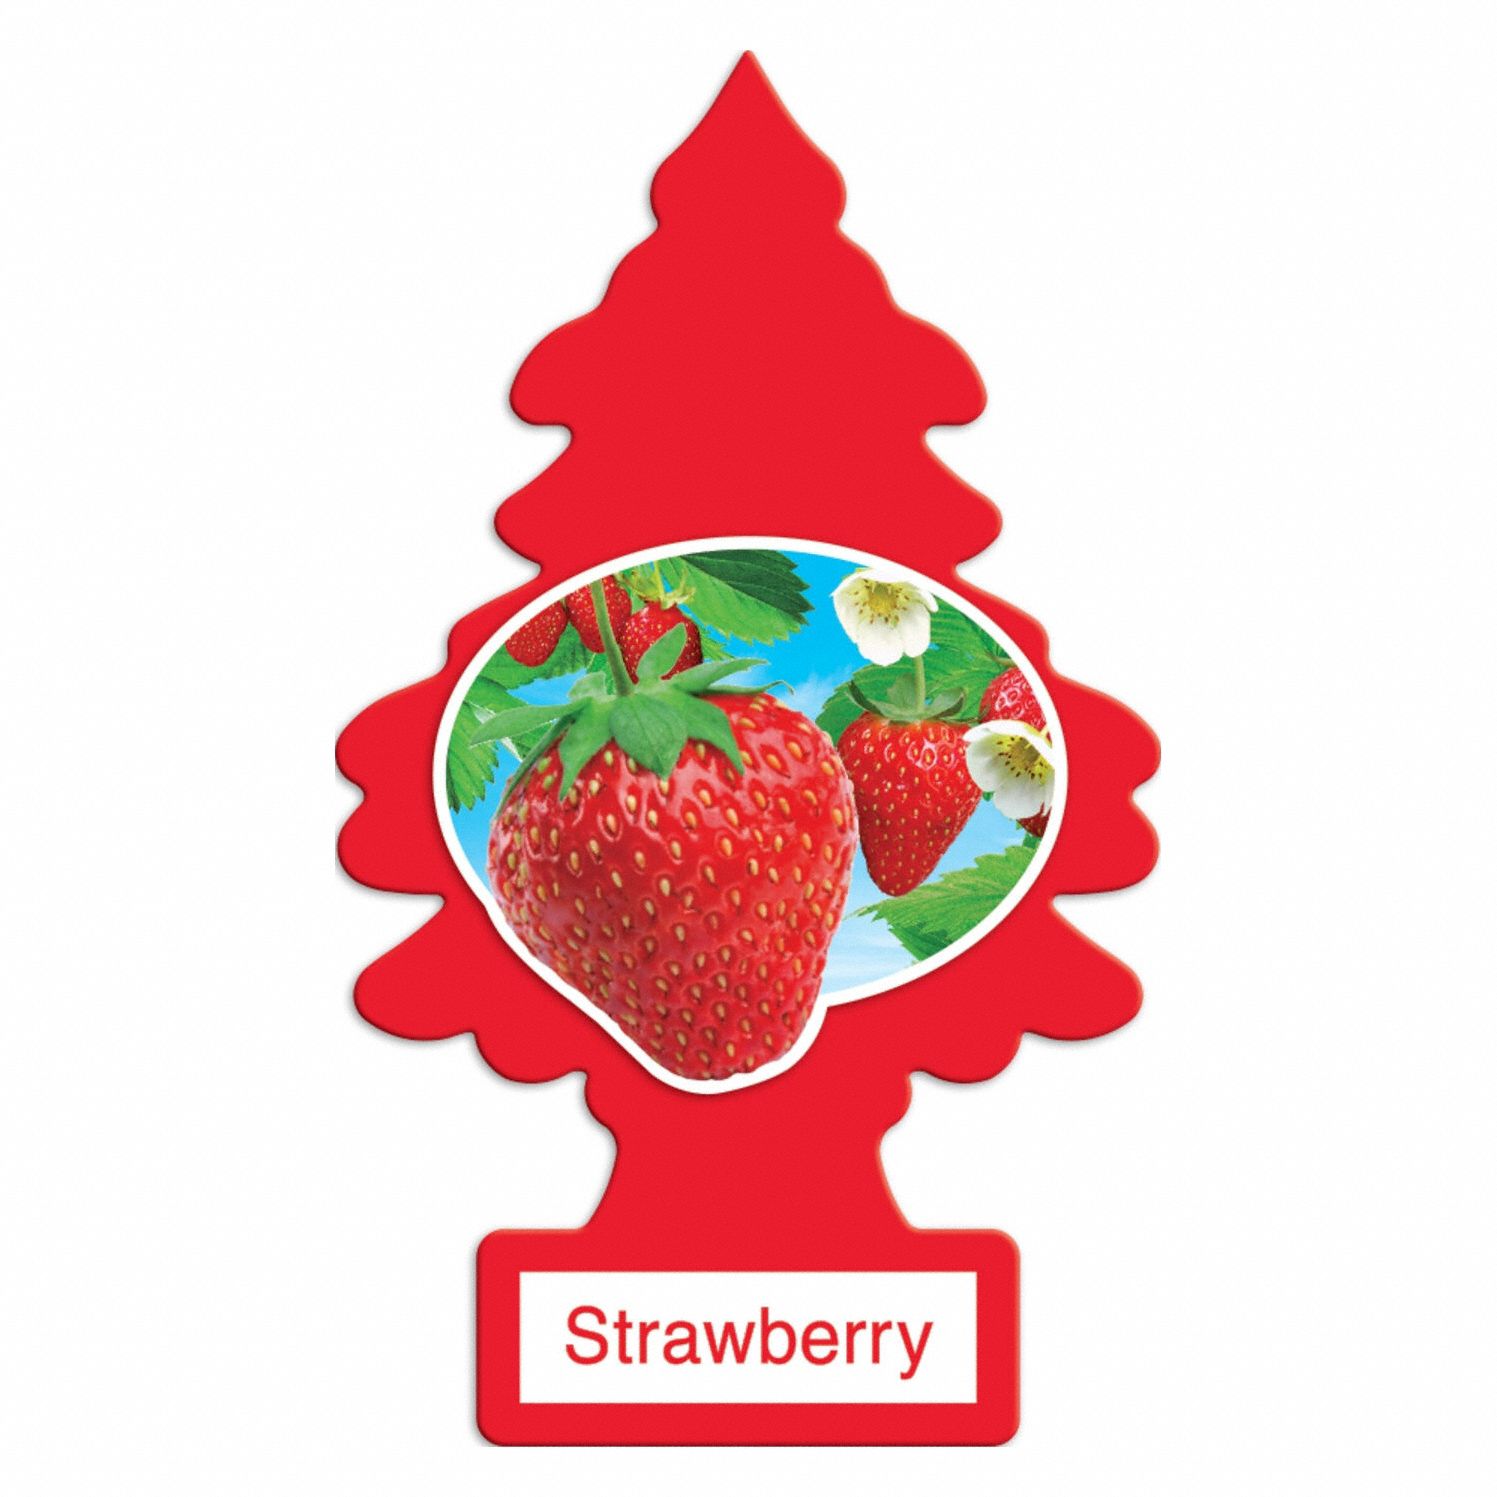 Air Freshener: Strawberry, Red, Card with String Air Freshener